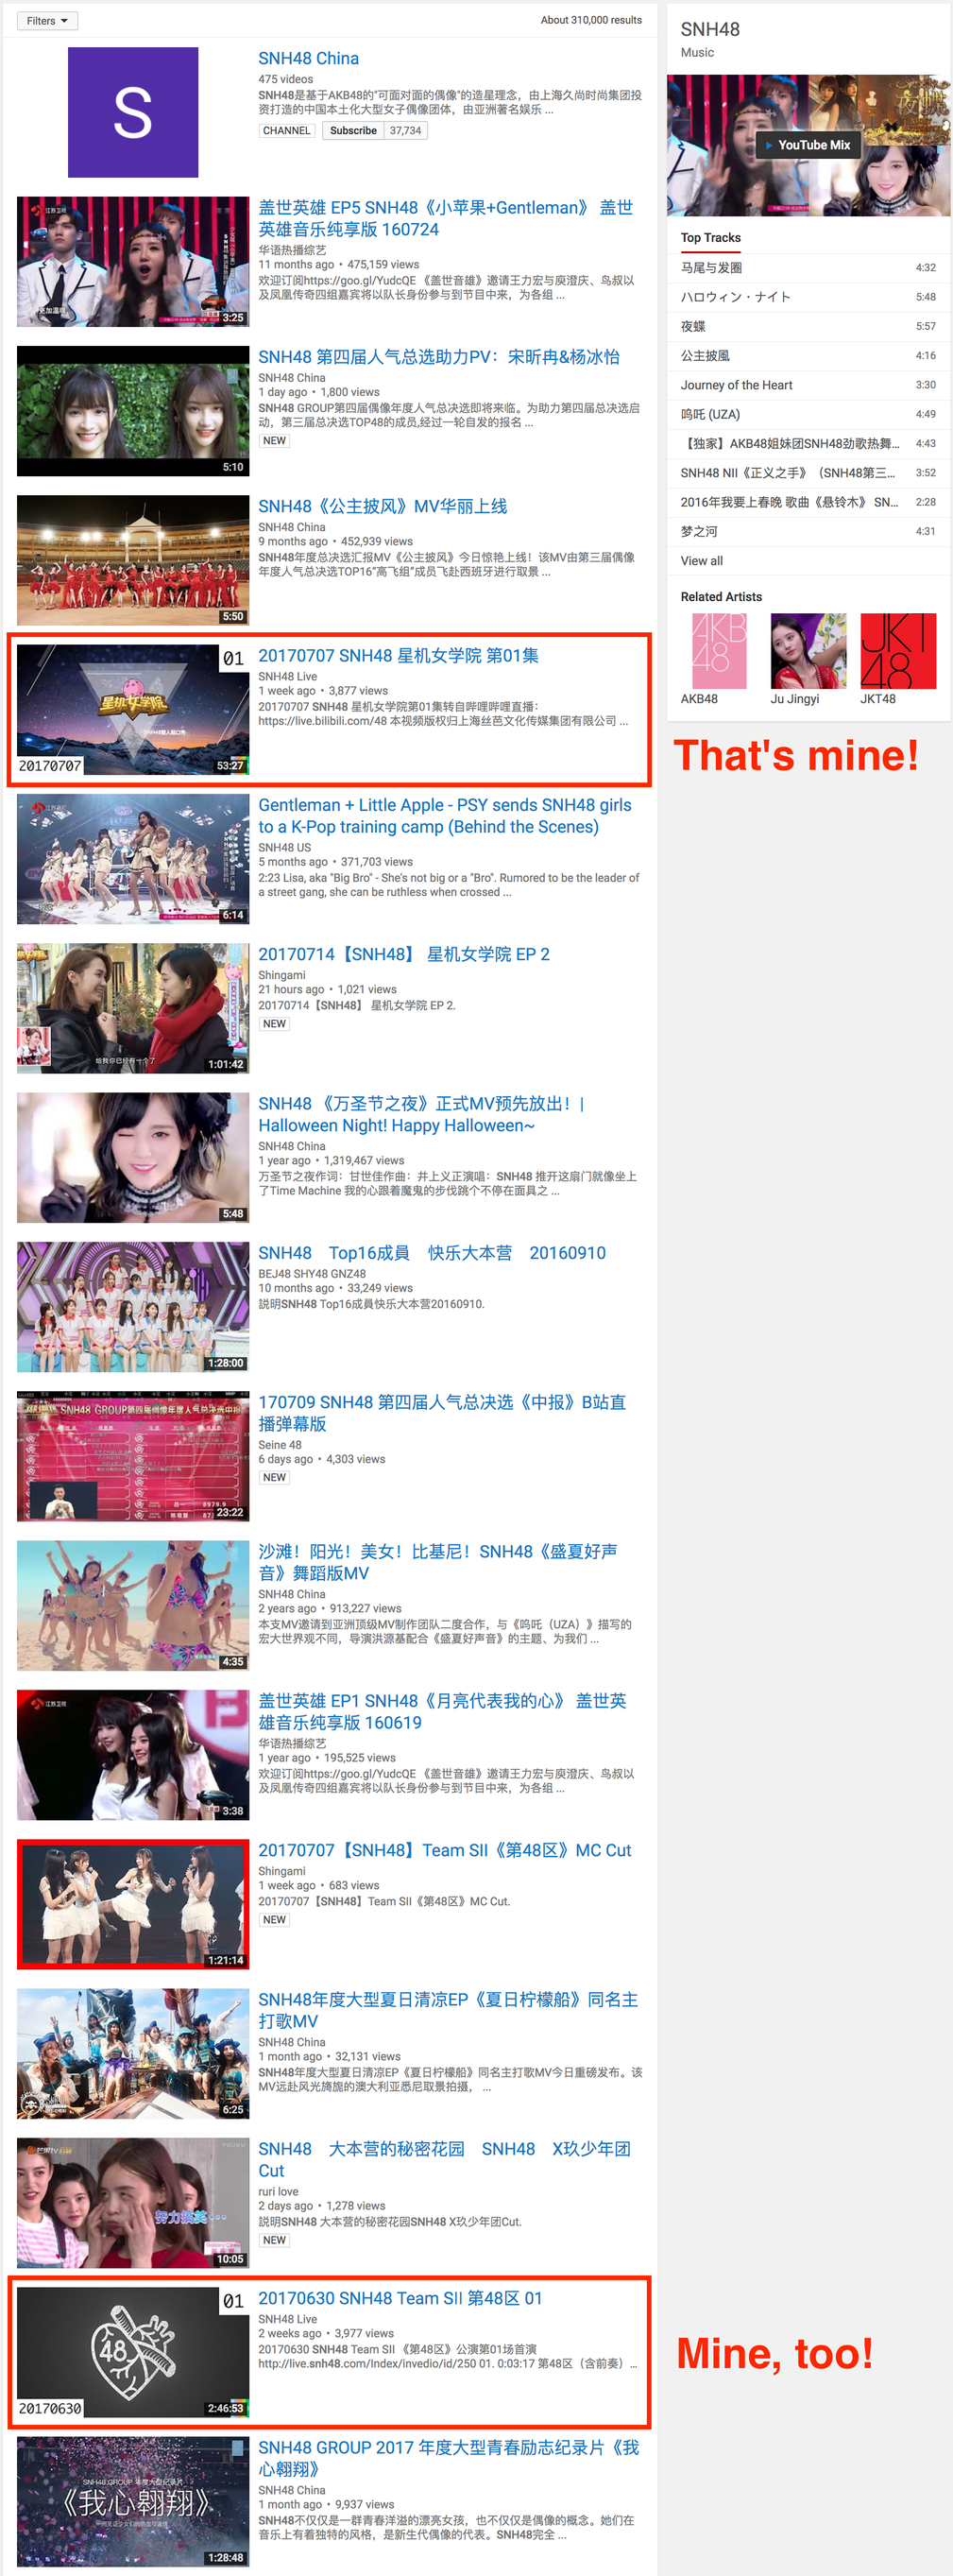 My video on the first page of search results for “SNH48”.